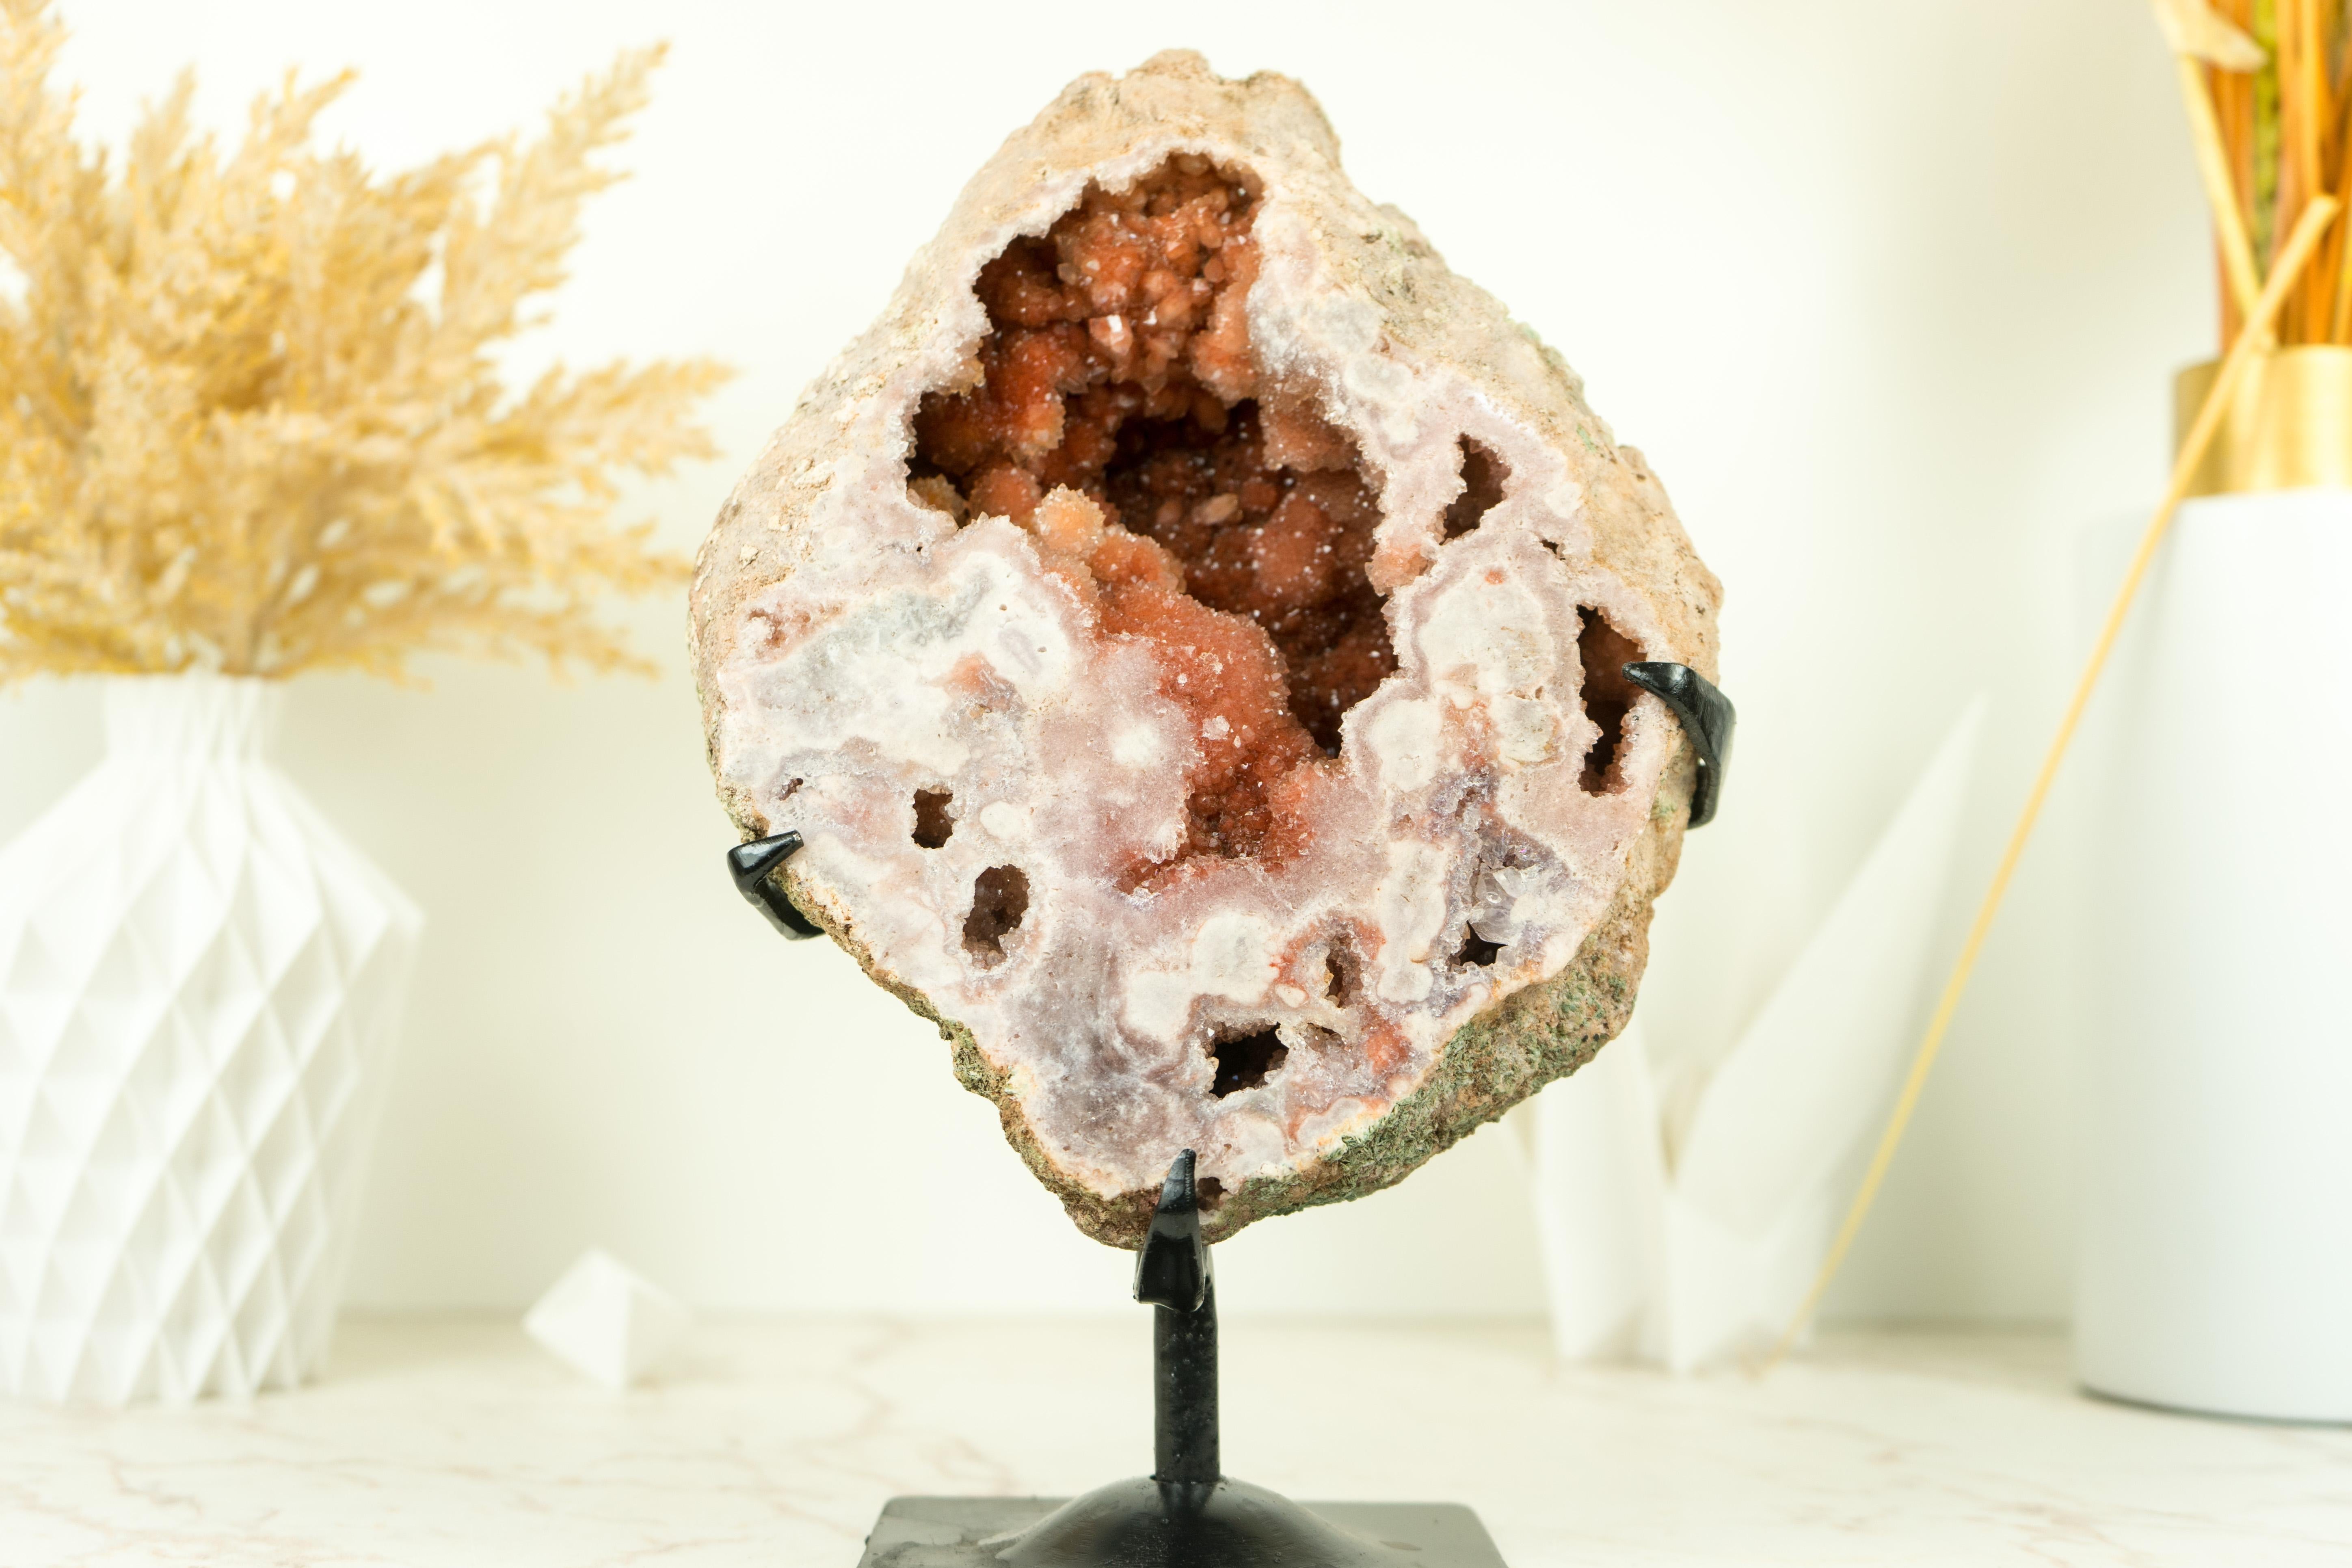 A beautiful natural Pink Amethyst Geode filled with a rarely seen Deep Red Amethyst Druzy, this gorgeous specimen is undoubtedly a collectible piece of nature that would look fantastic in any decor or on an altar.

The main characteristics of this